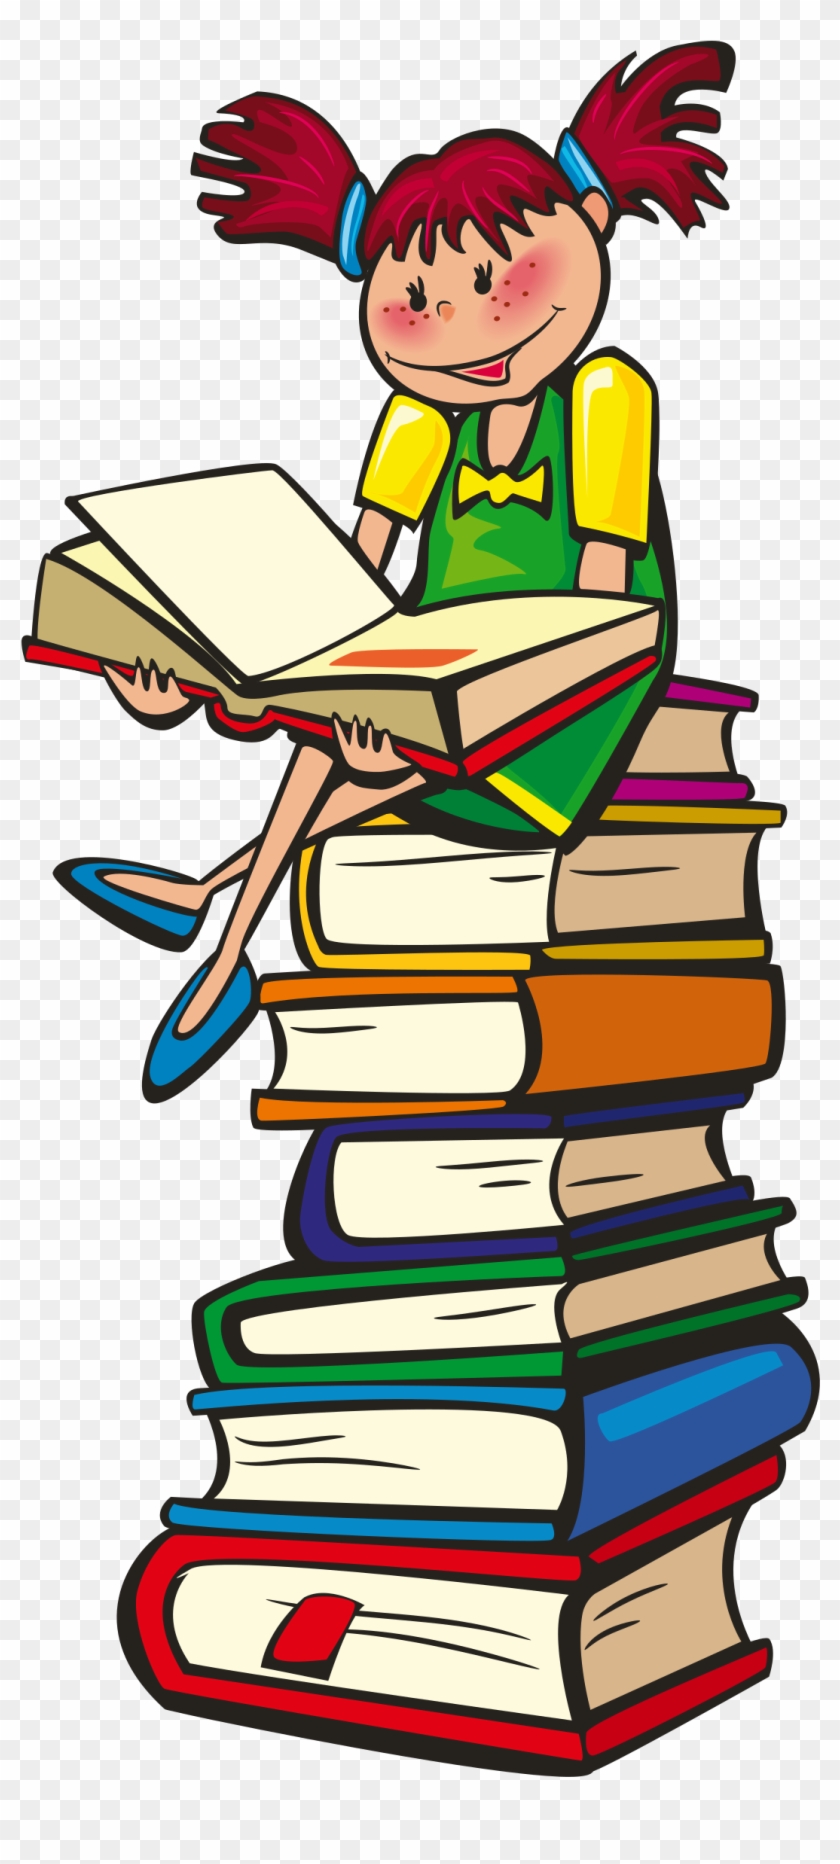 reading a book clipart